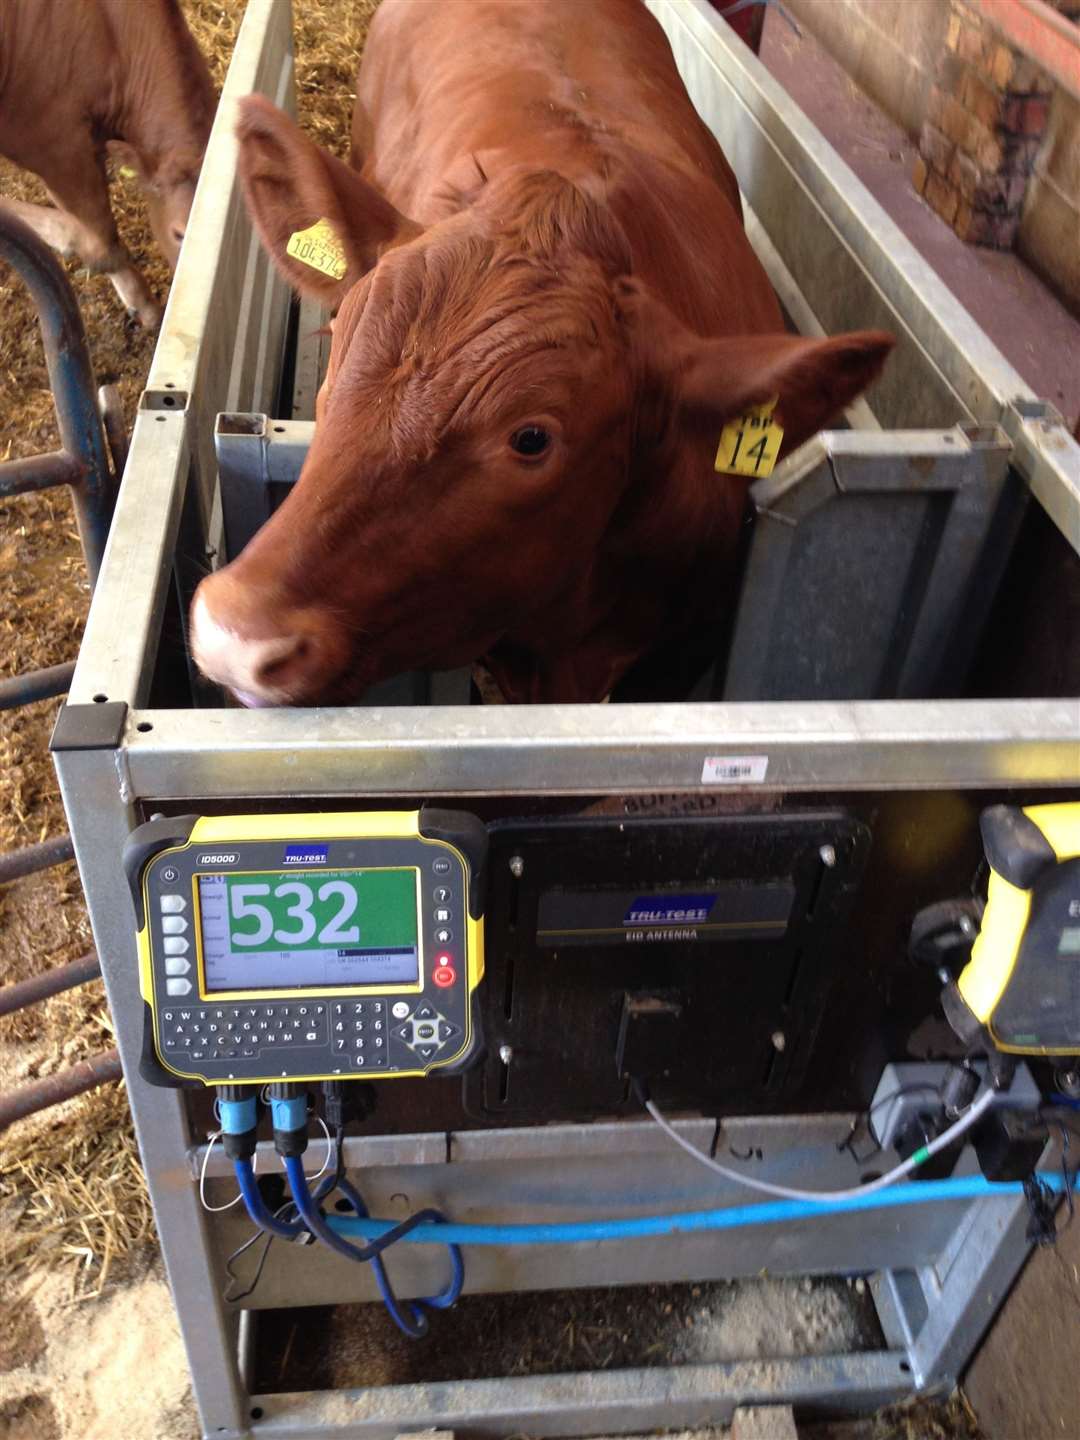 The automated weighing platform, Ritchie Beef Monitor, has improved data collection for farmers, allowing for higher accuracy of finishing cattle live weight and weight gains